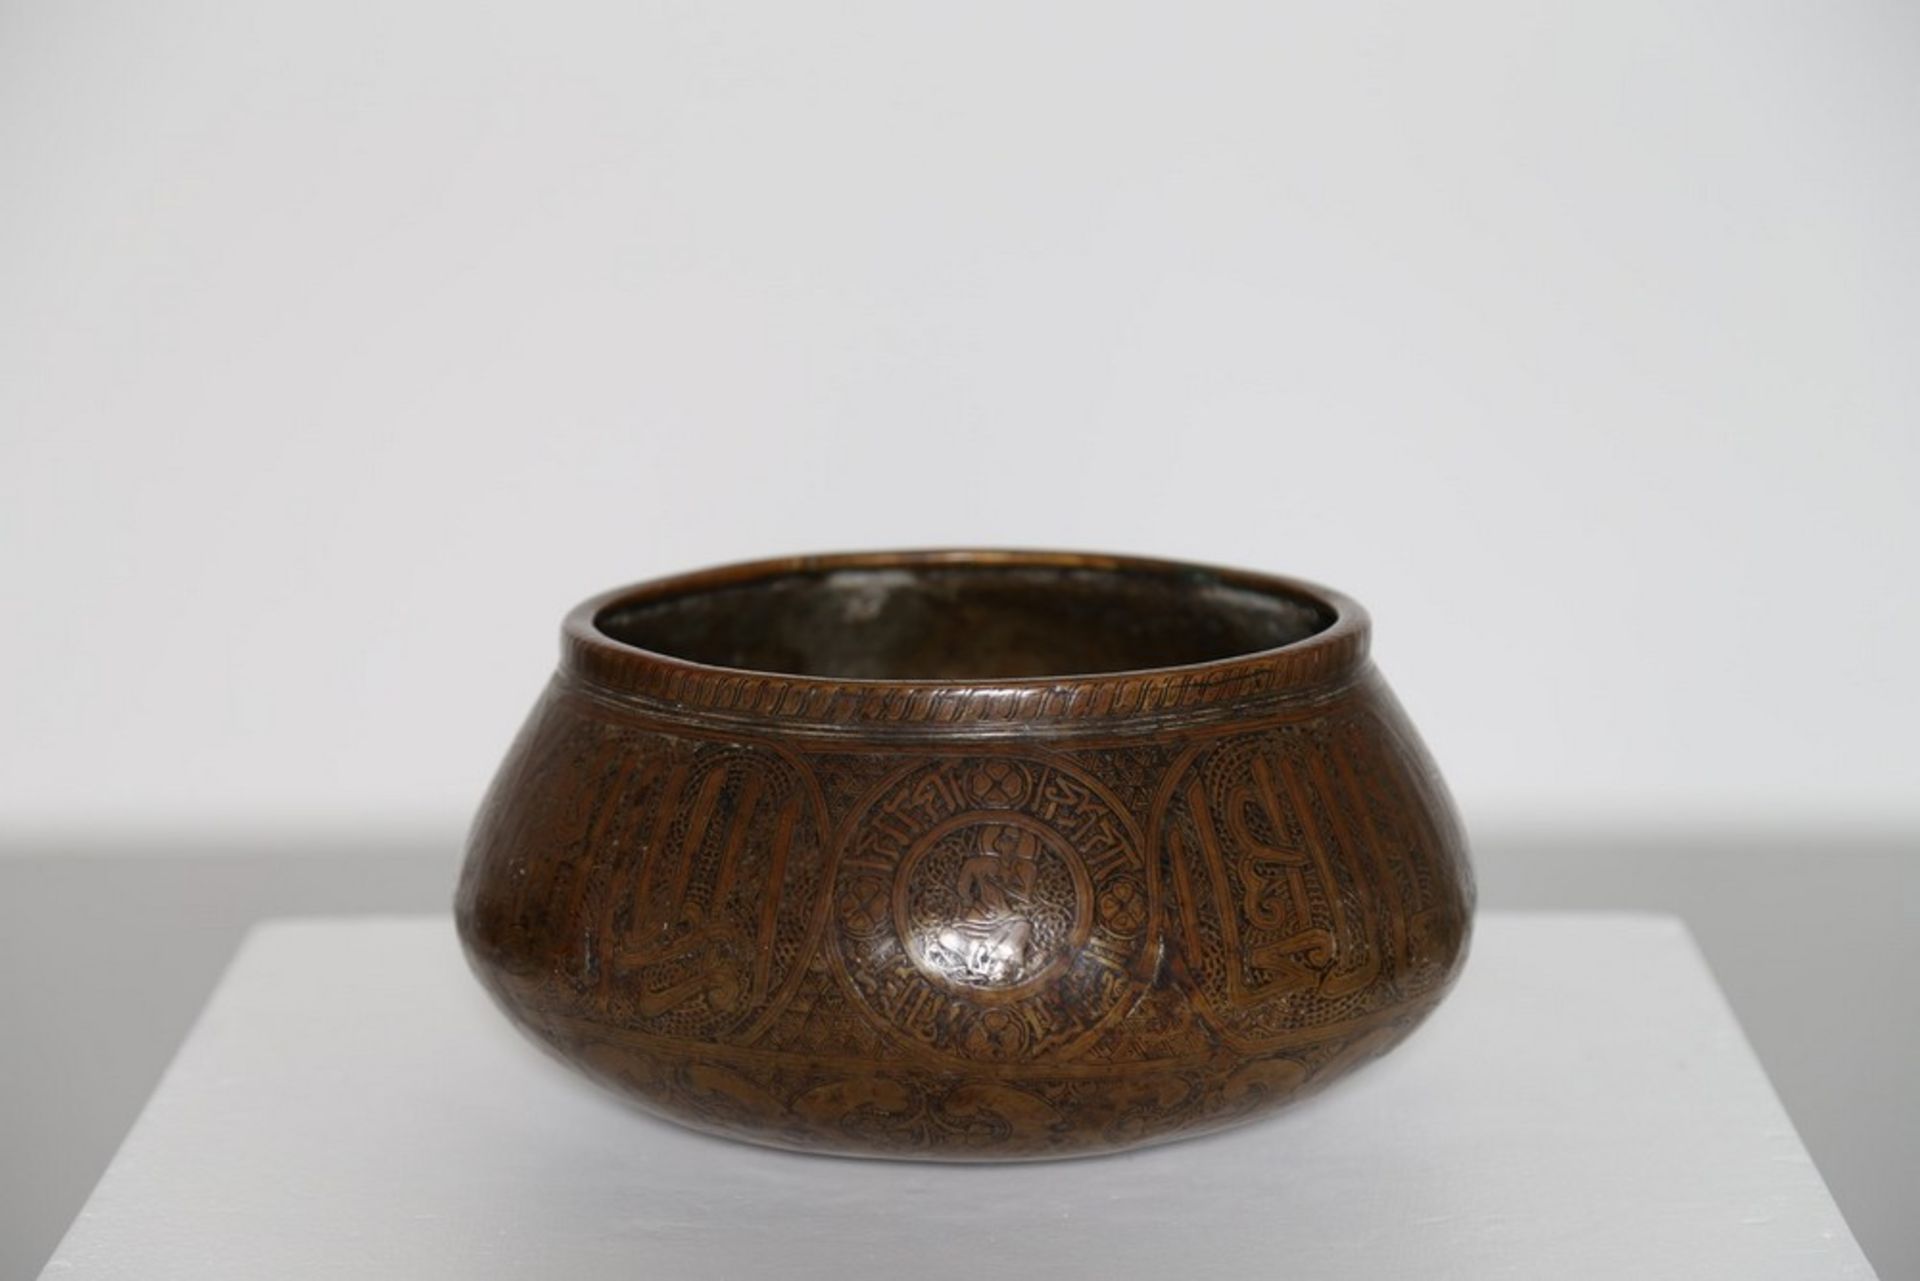 Arte Islamica  A brass Fars bowl decorated with thuluth inscriptions and spiral vegetal motifsIran, 